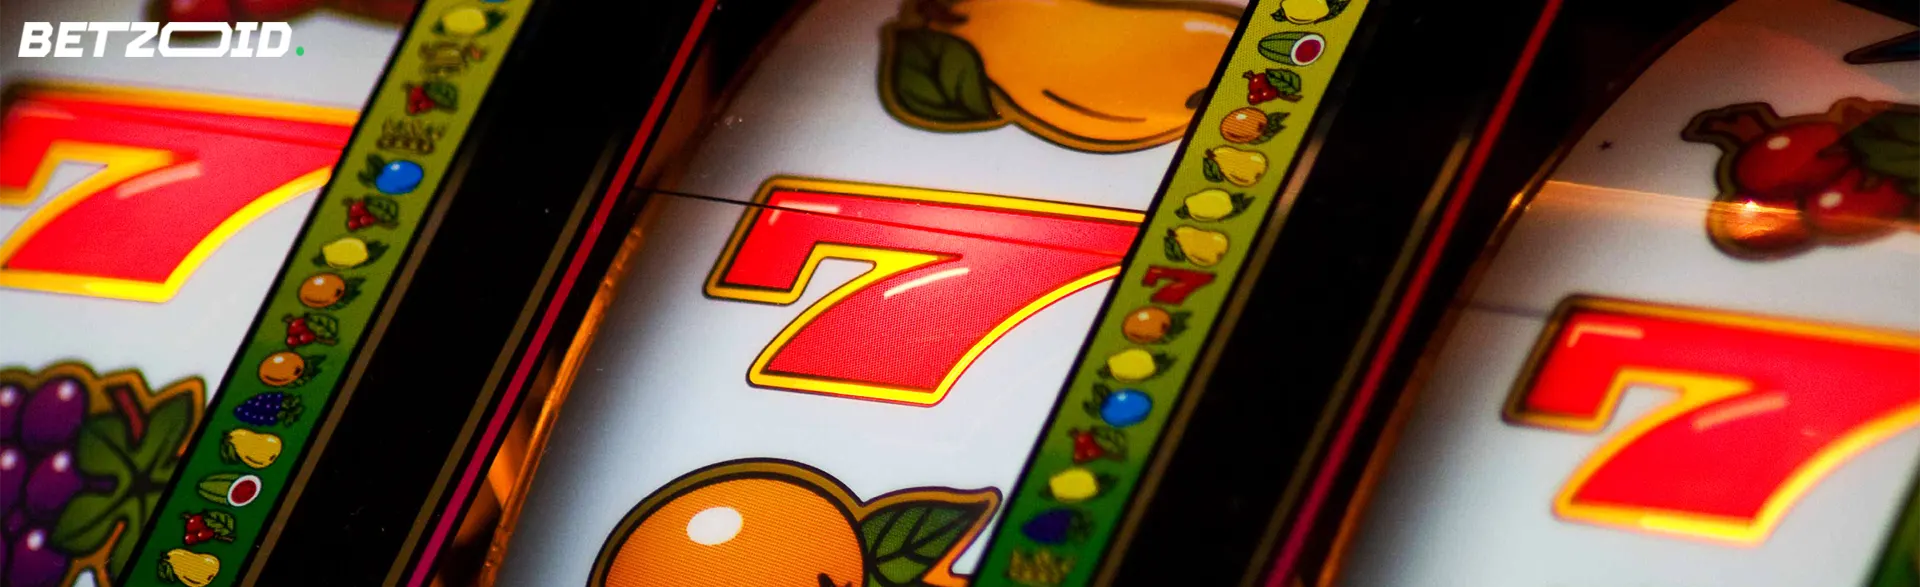 Slot machine display with vibrant sevens and fruits, perfect for a real money casino pokies app on iPhone.